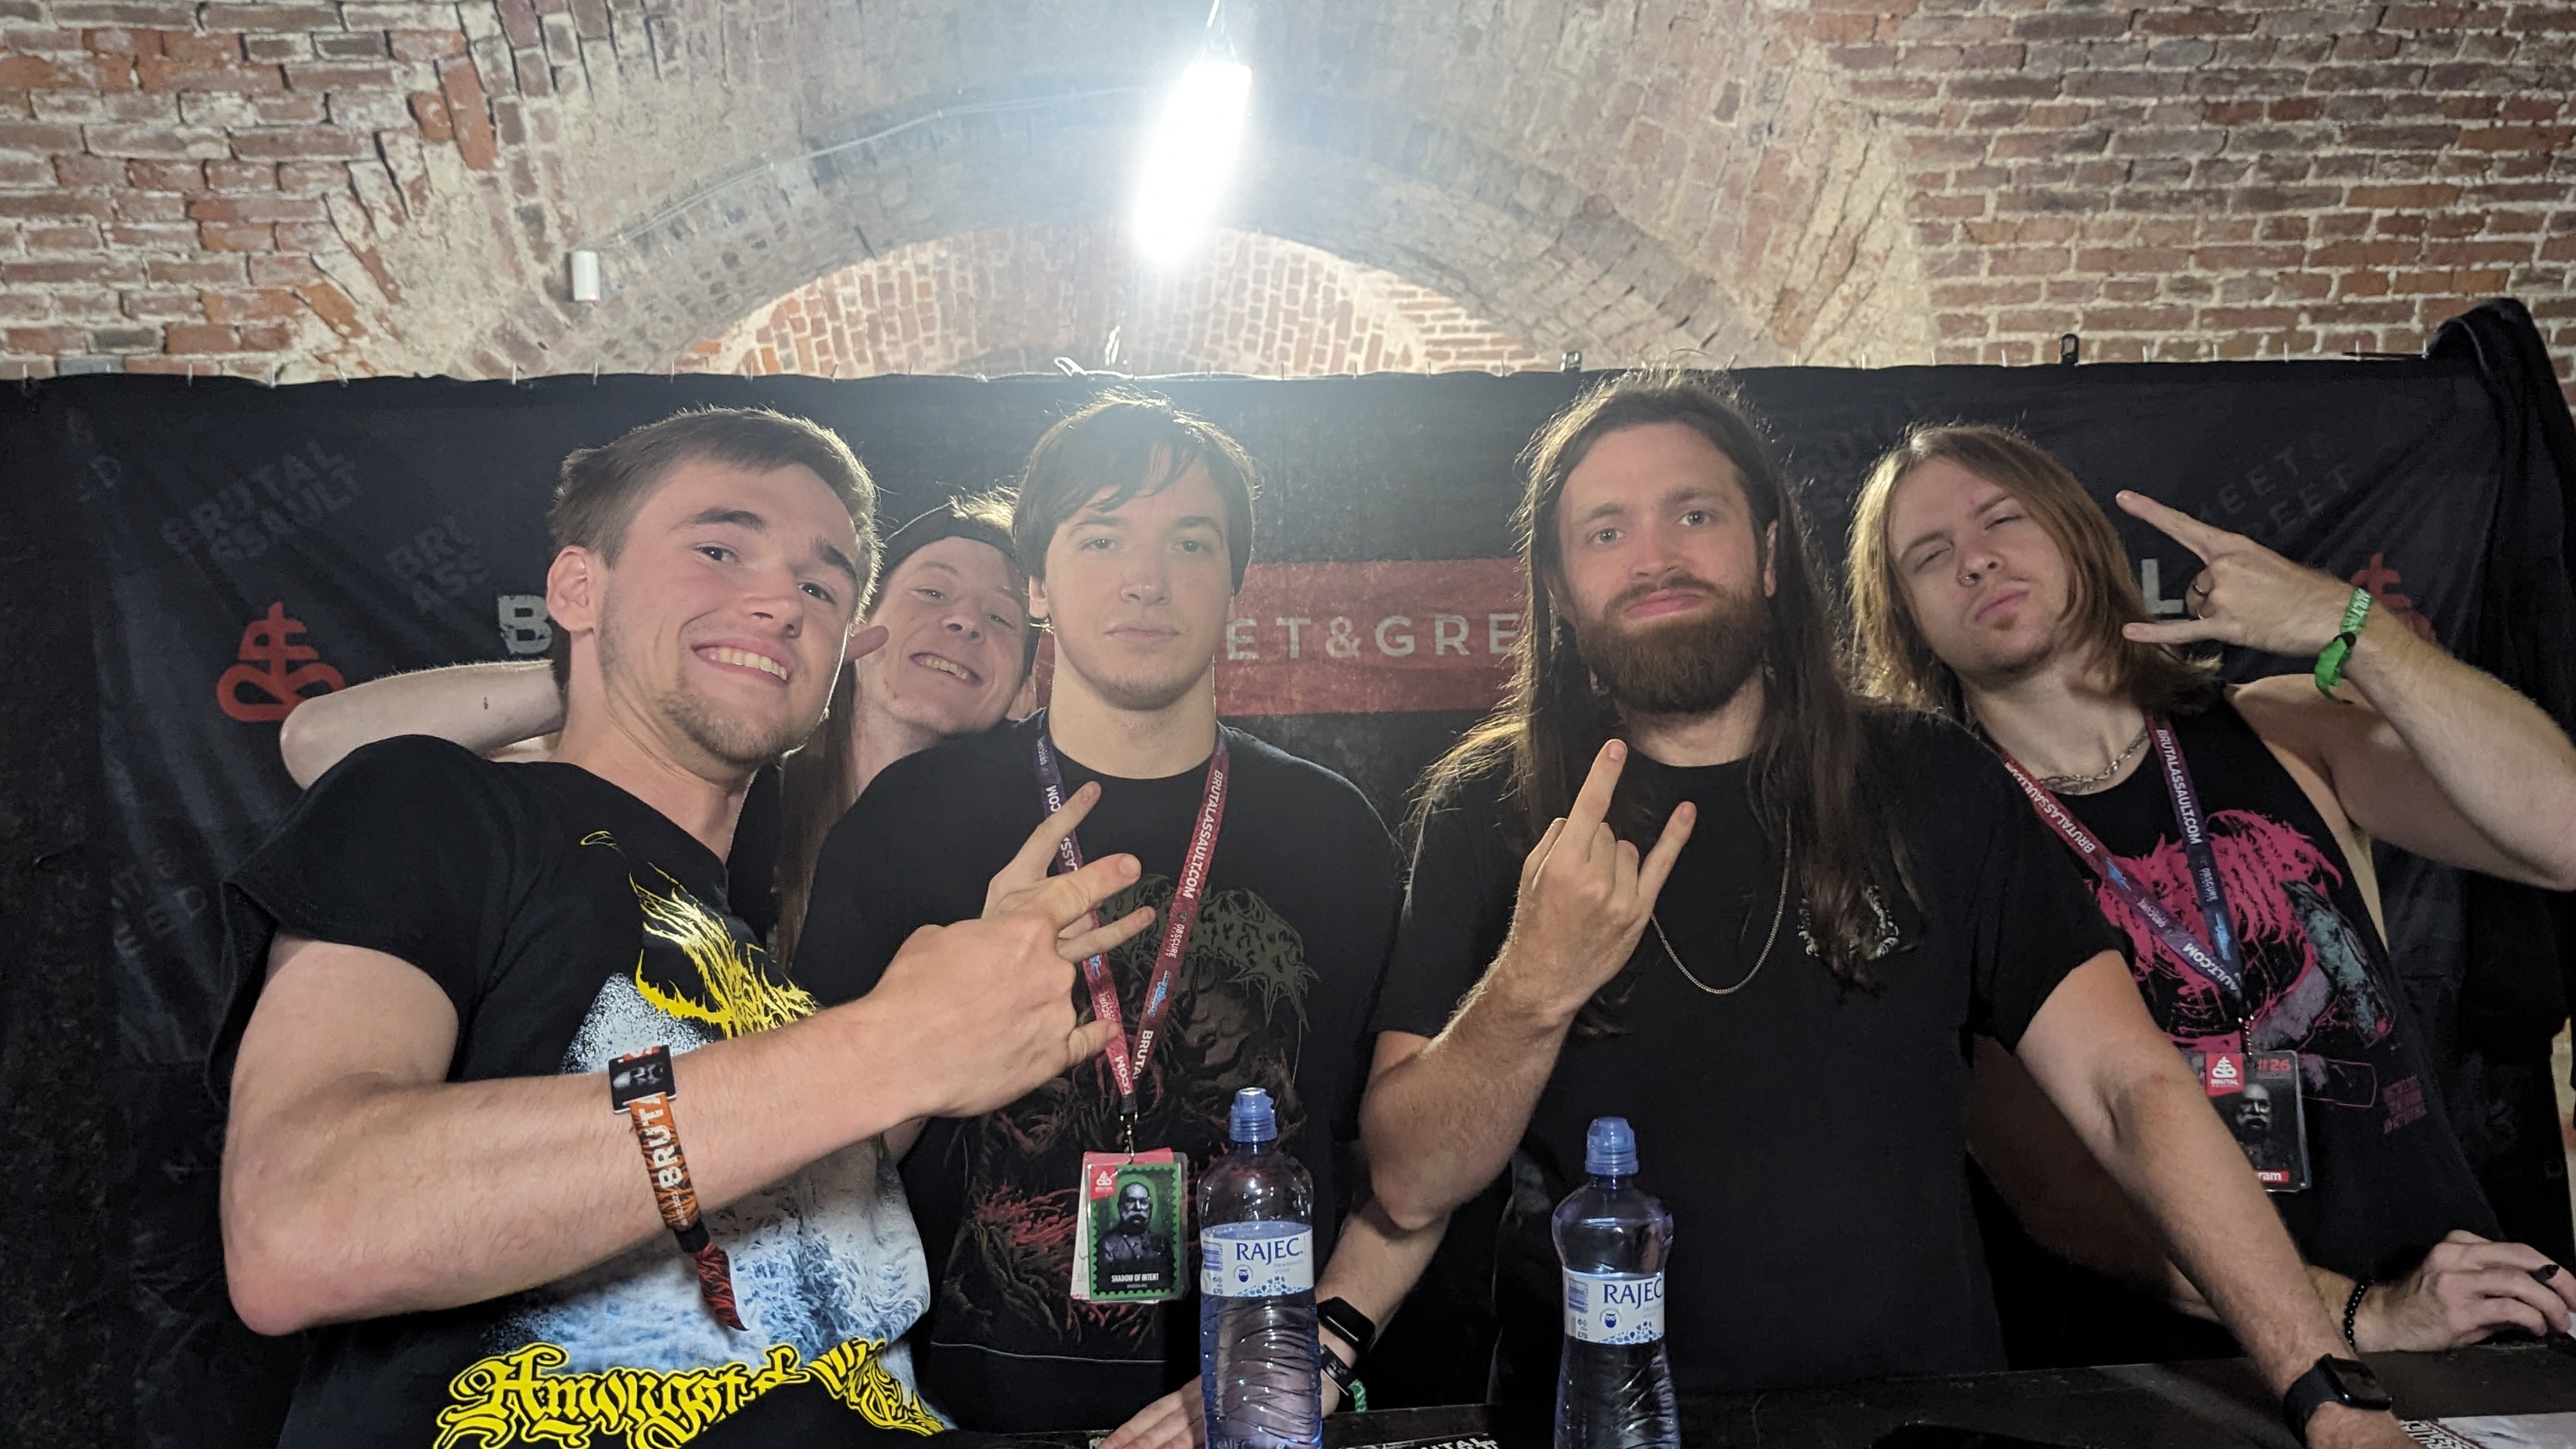 Photo of me and members of band Shadow of Intent